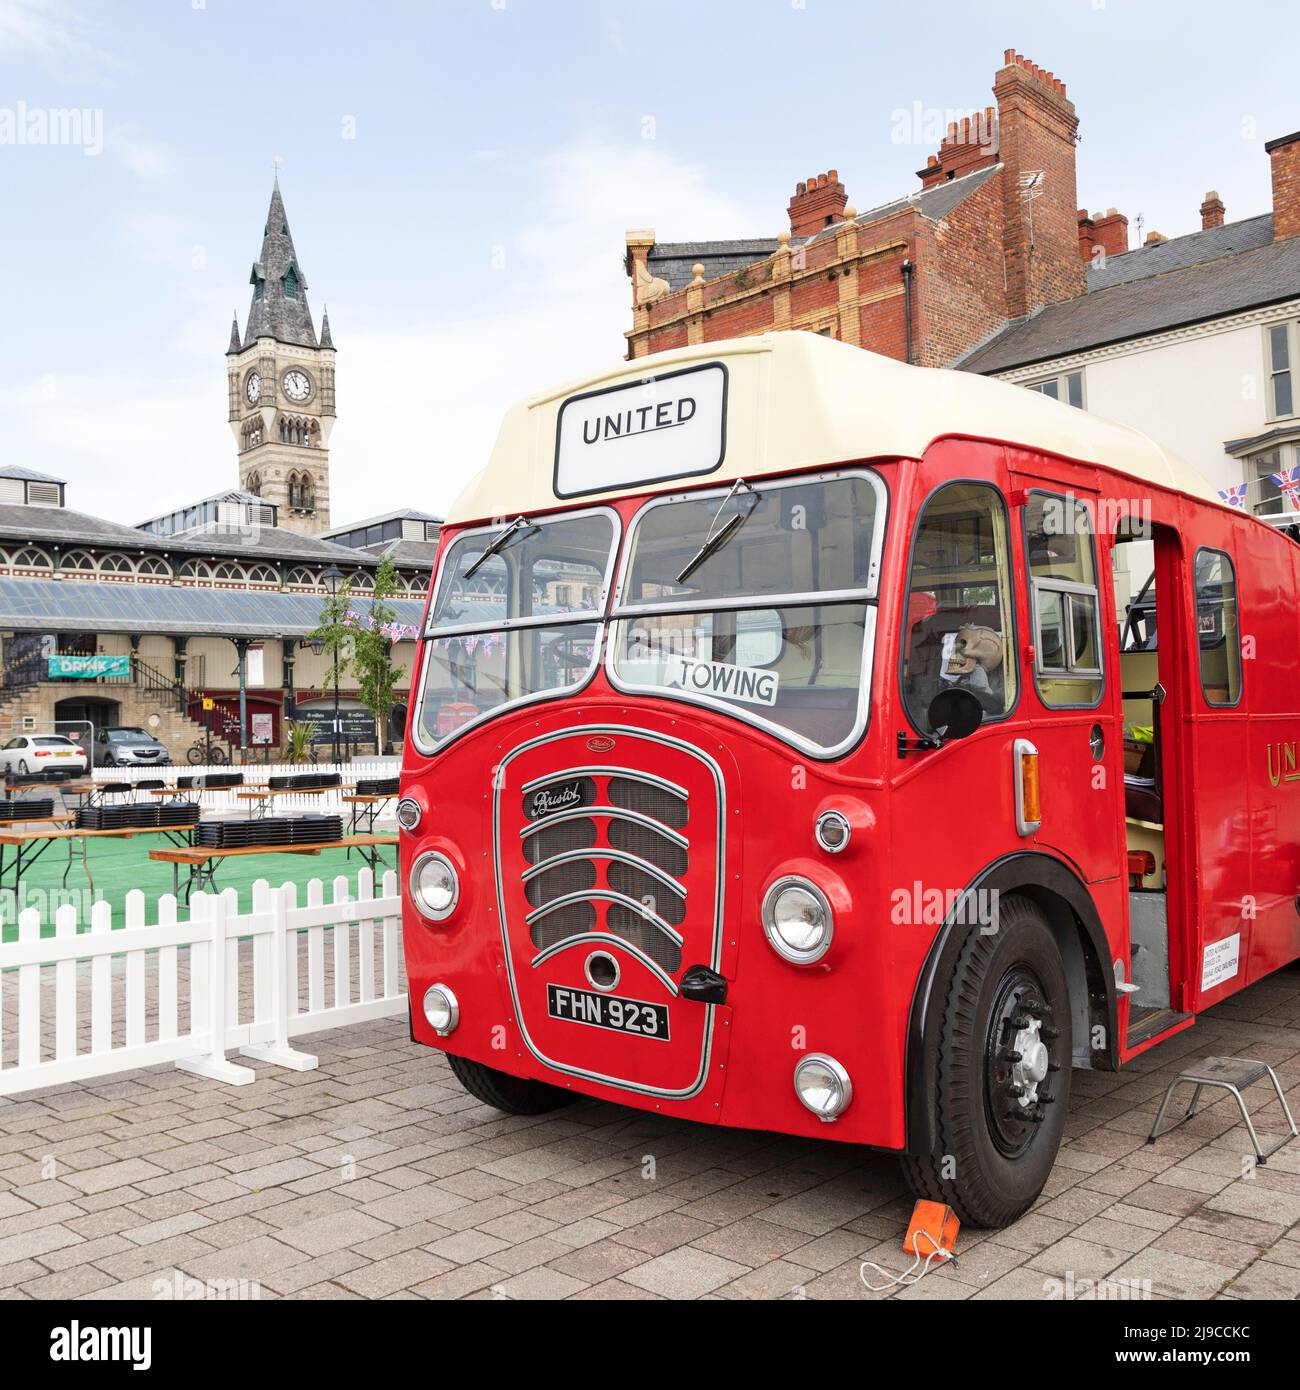 Vintage vehicle on the Horse Market in Darlington, County Durham, England. The clock tower of Darlington Covered Market can be seen left of the pictur Stock Photo